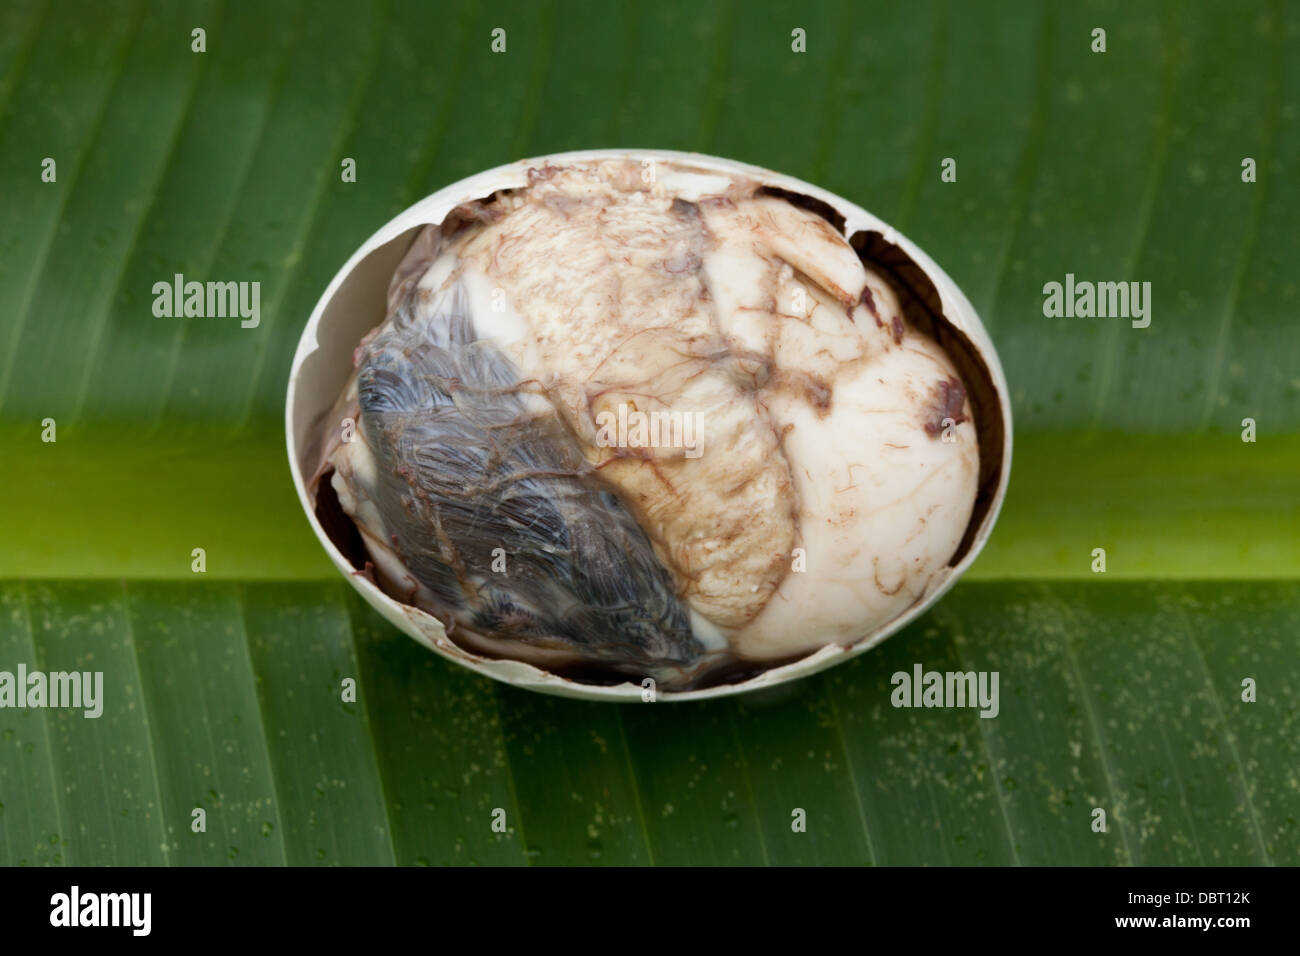 A partially opened balut, or fertilized duck egg, pictured on a banana leaf in Oriental Mindoro, Philippines. Stock Photo